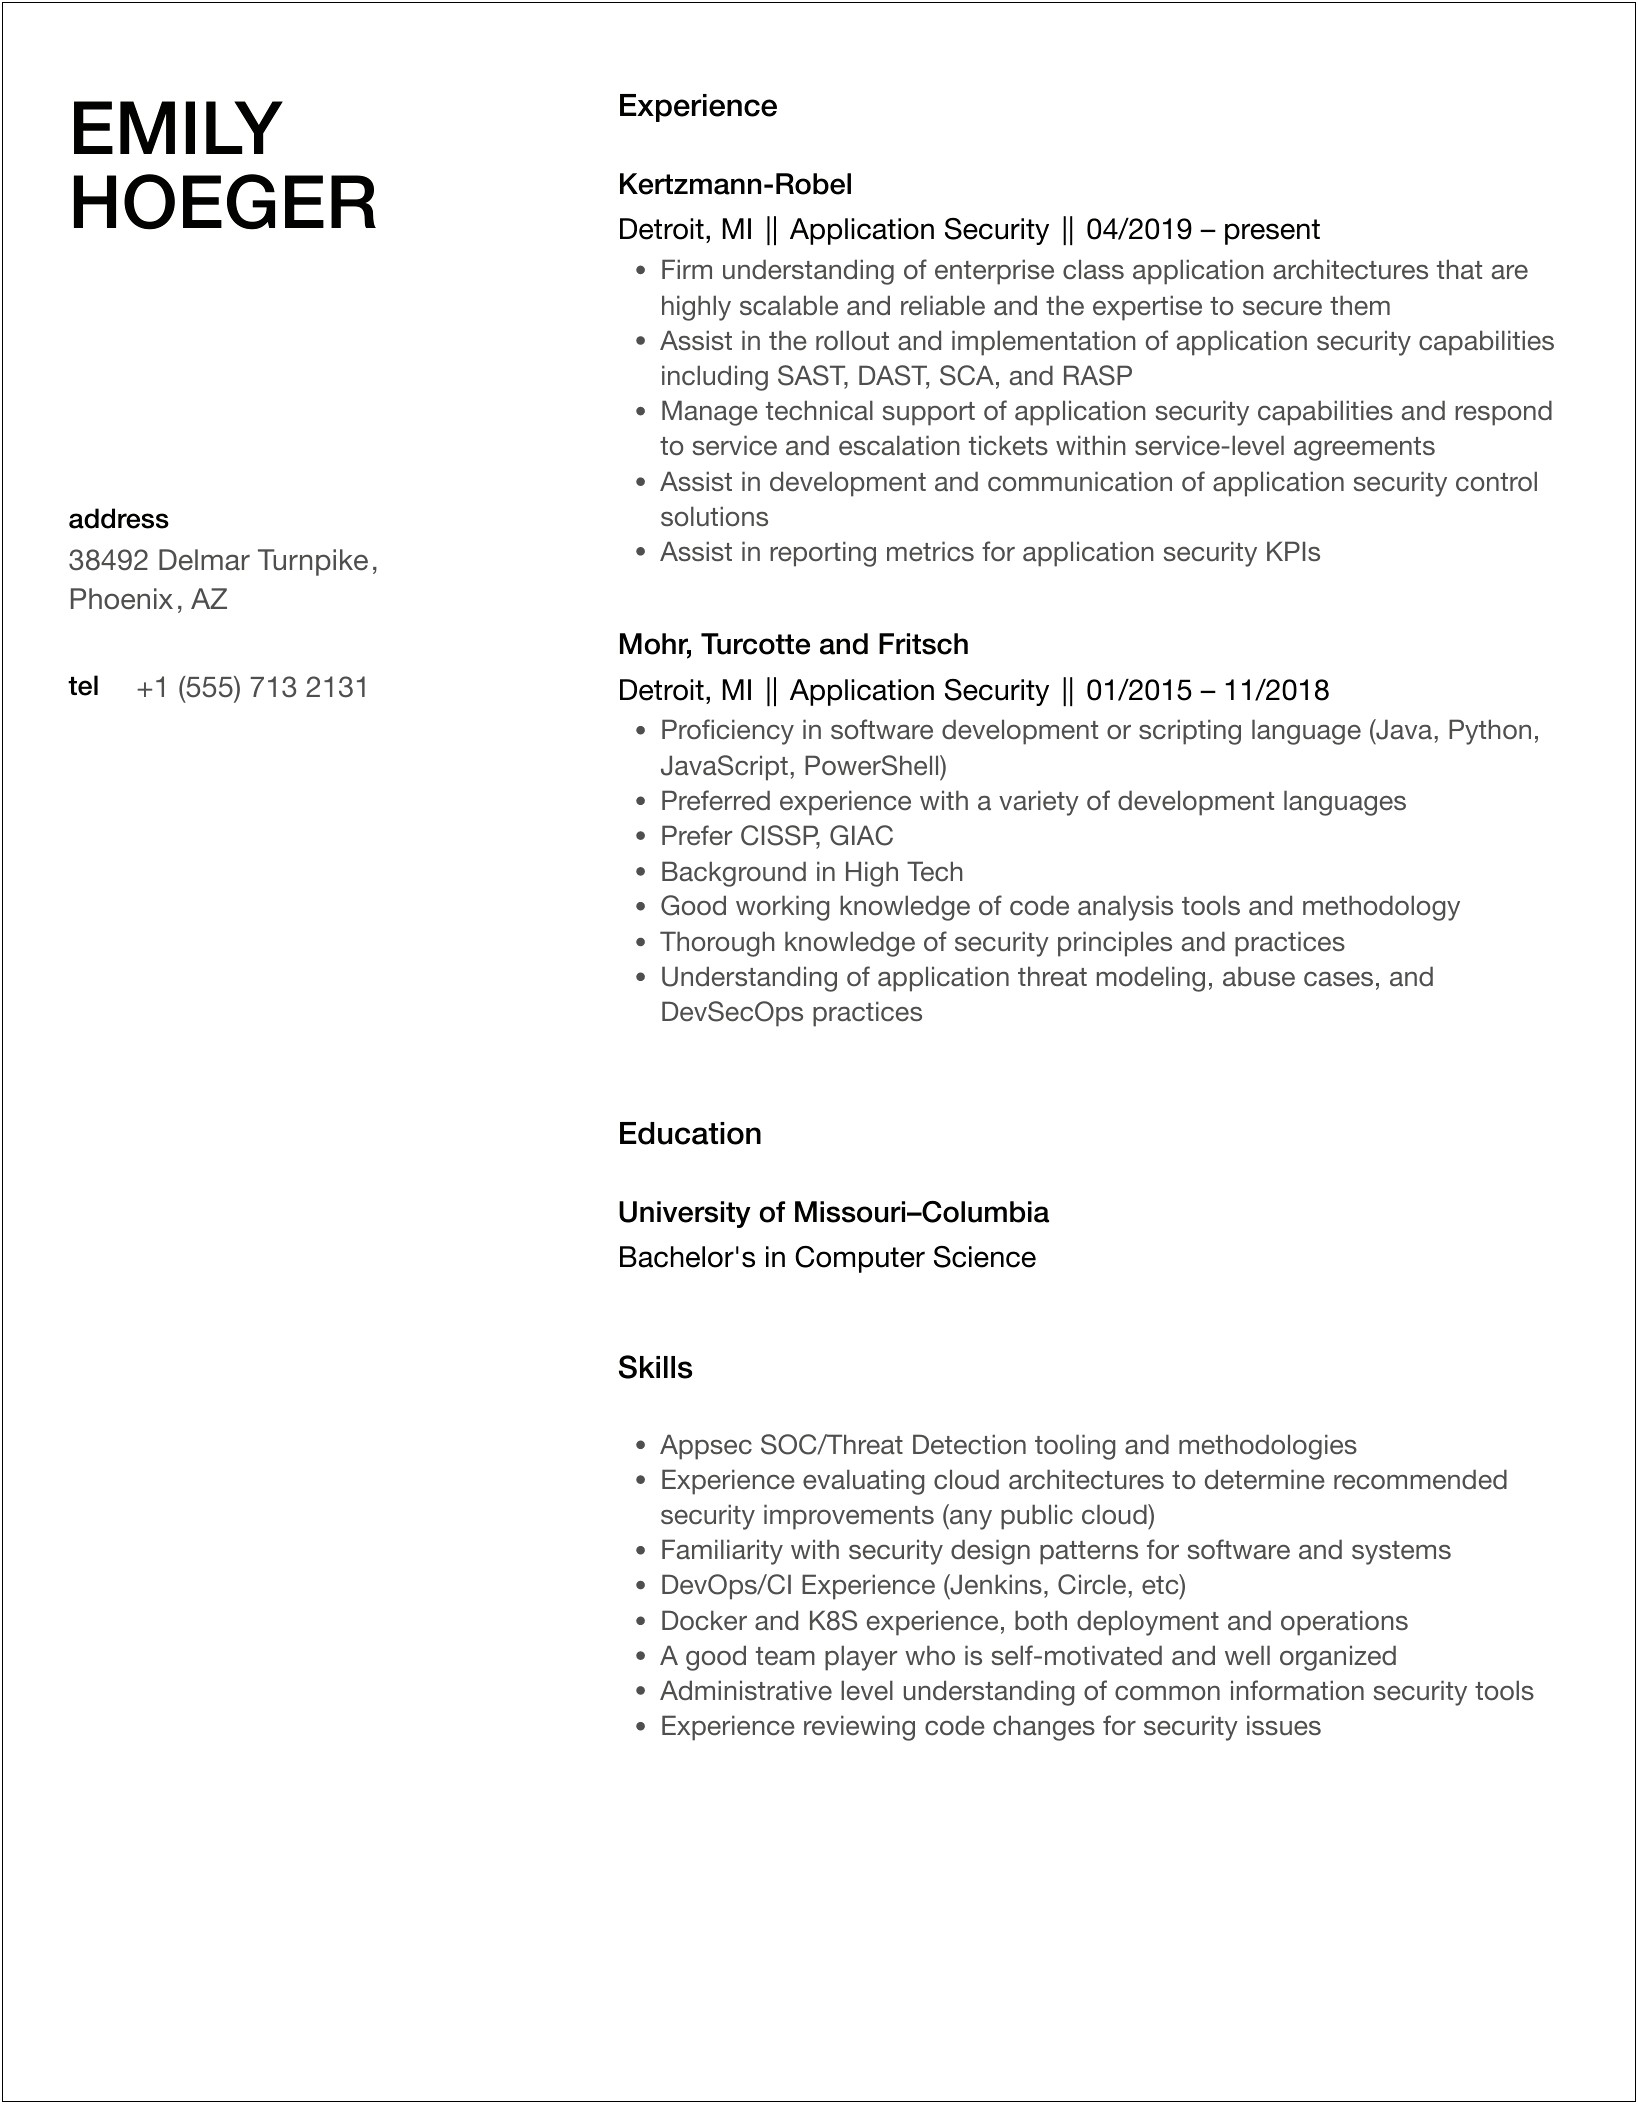 Servicenow Resume With Active Directory Experience Hireit